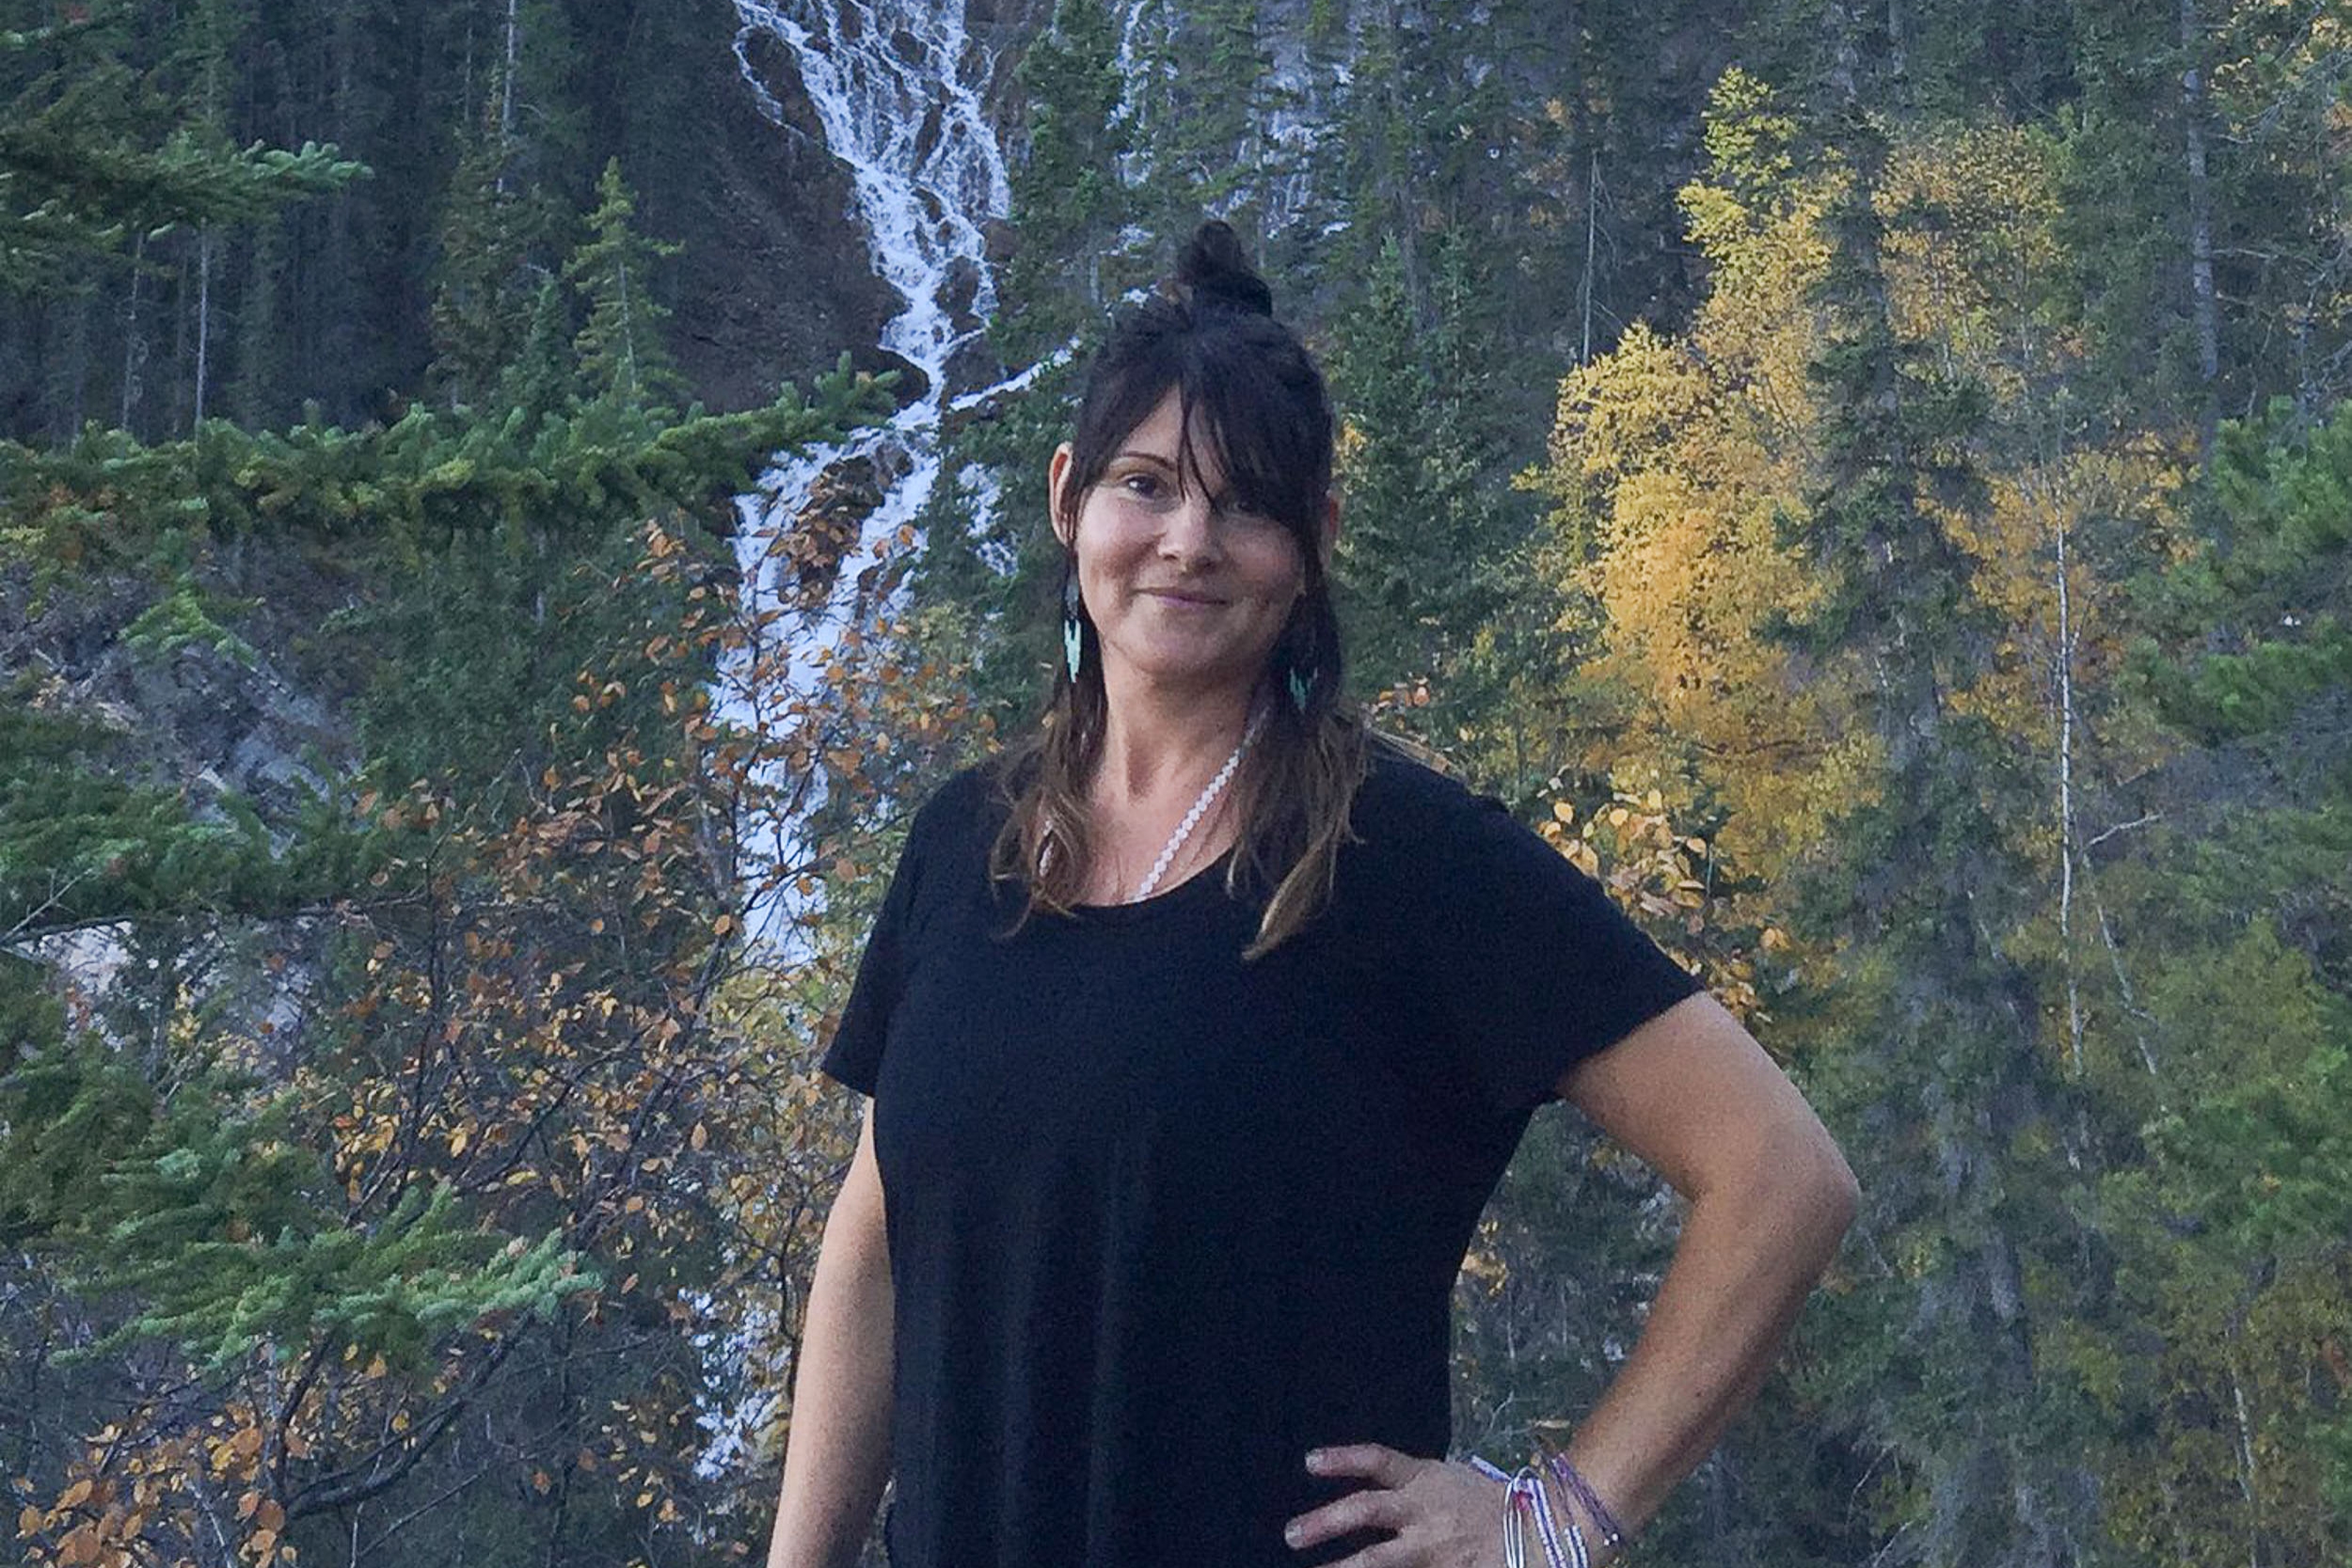 Confident yoga instructor in a casual black outfit standing in front of a waterfall surrounded by evergreens and autumn foliage, embodying the connection with nature that Shala Yoga studio in Squamish encourages.